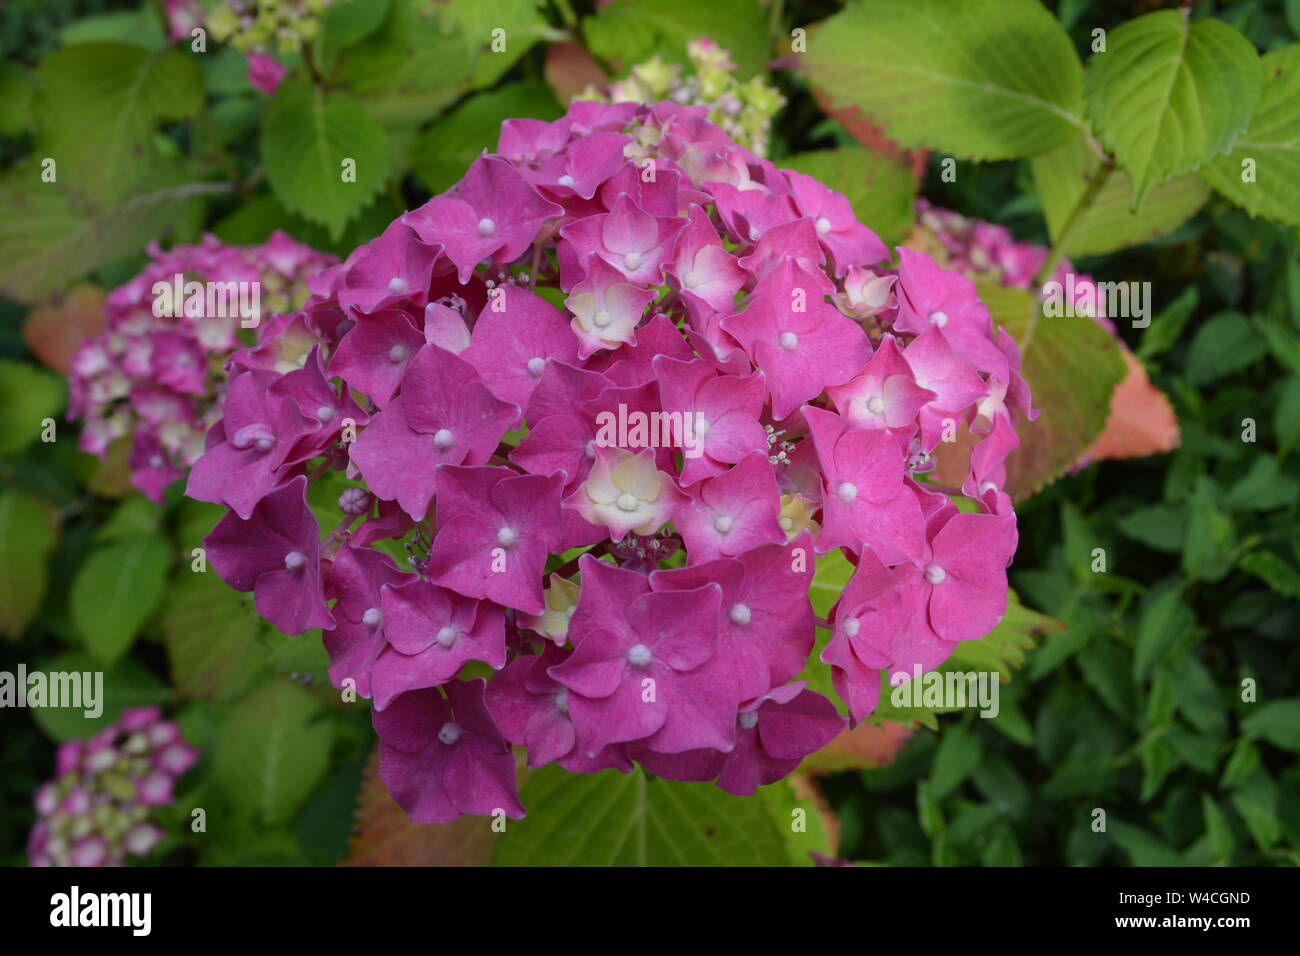 close up of healthy pink hydrangea with green pointed leaves in the background re gardening flowering plants shrubs Stock Photo